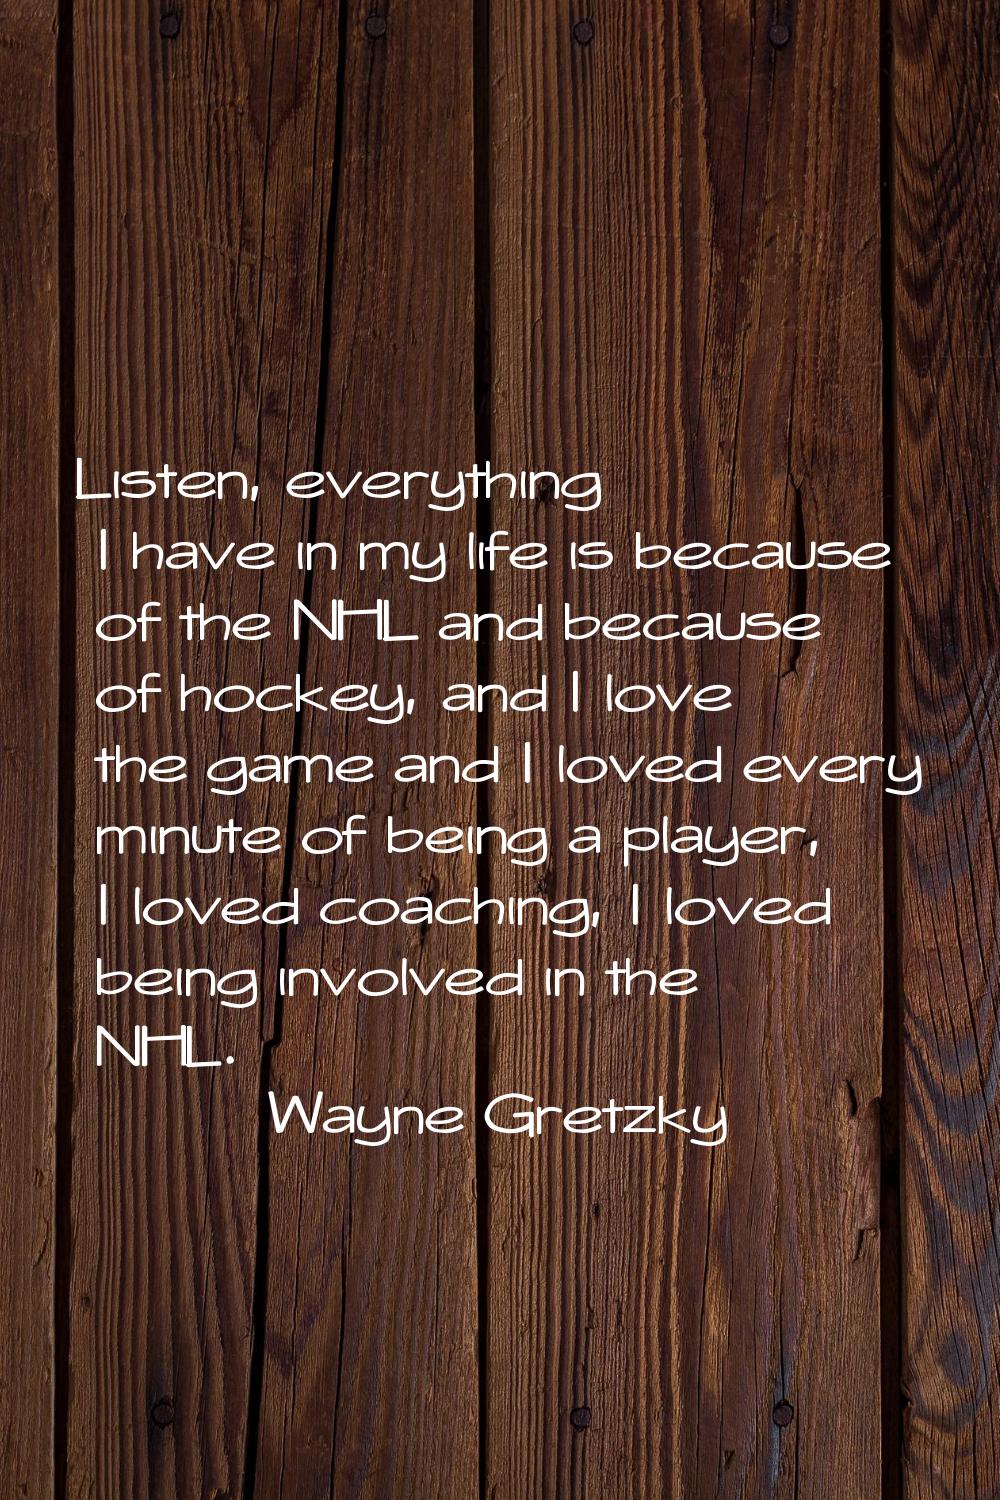 Listen, everything I have in my life is because of the NHL and because of hockey, and I love the ga